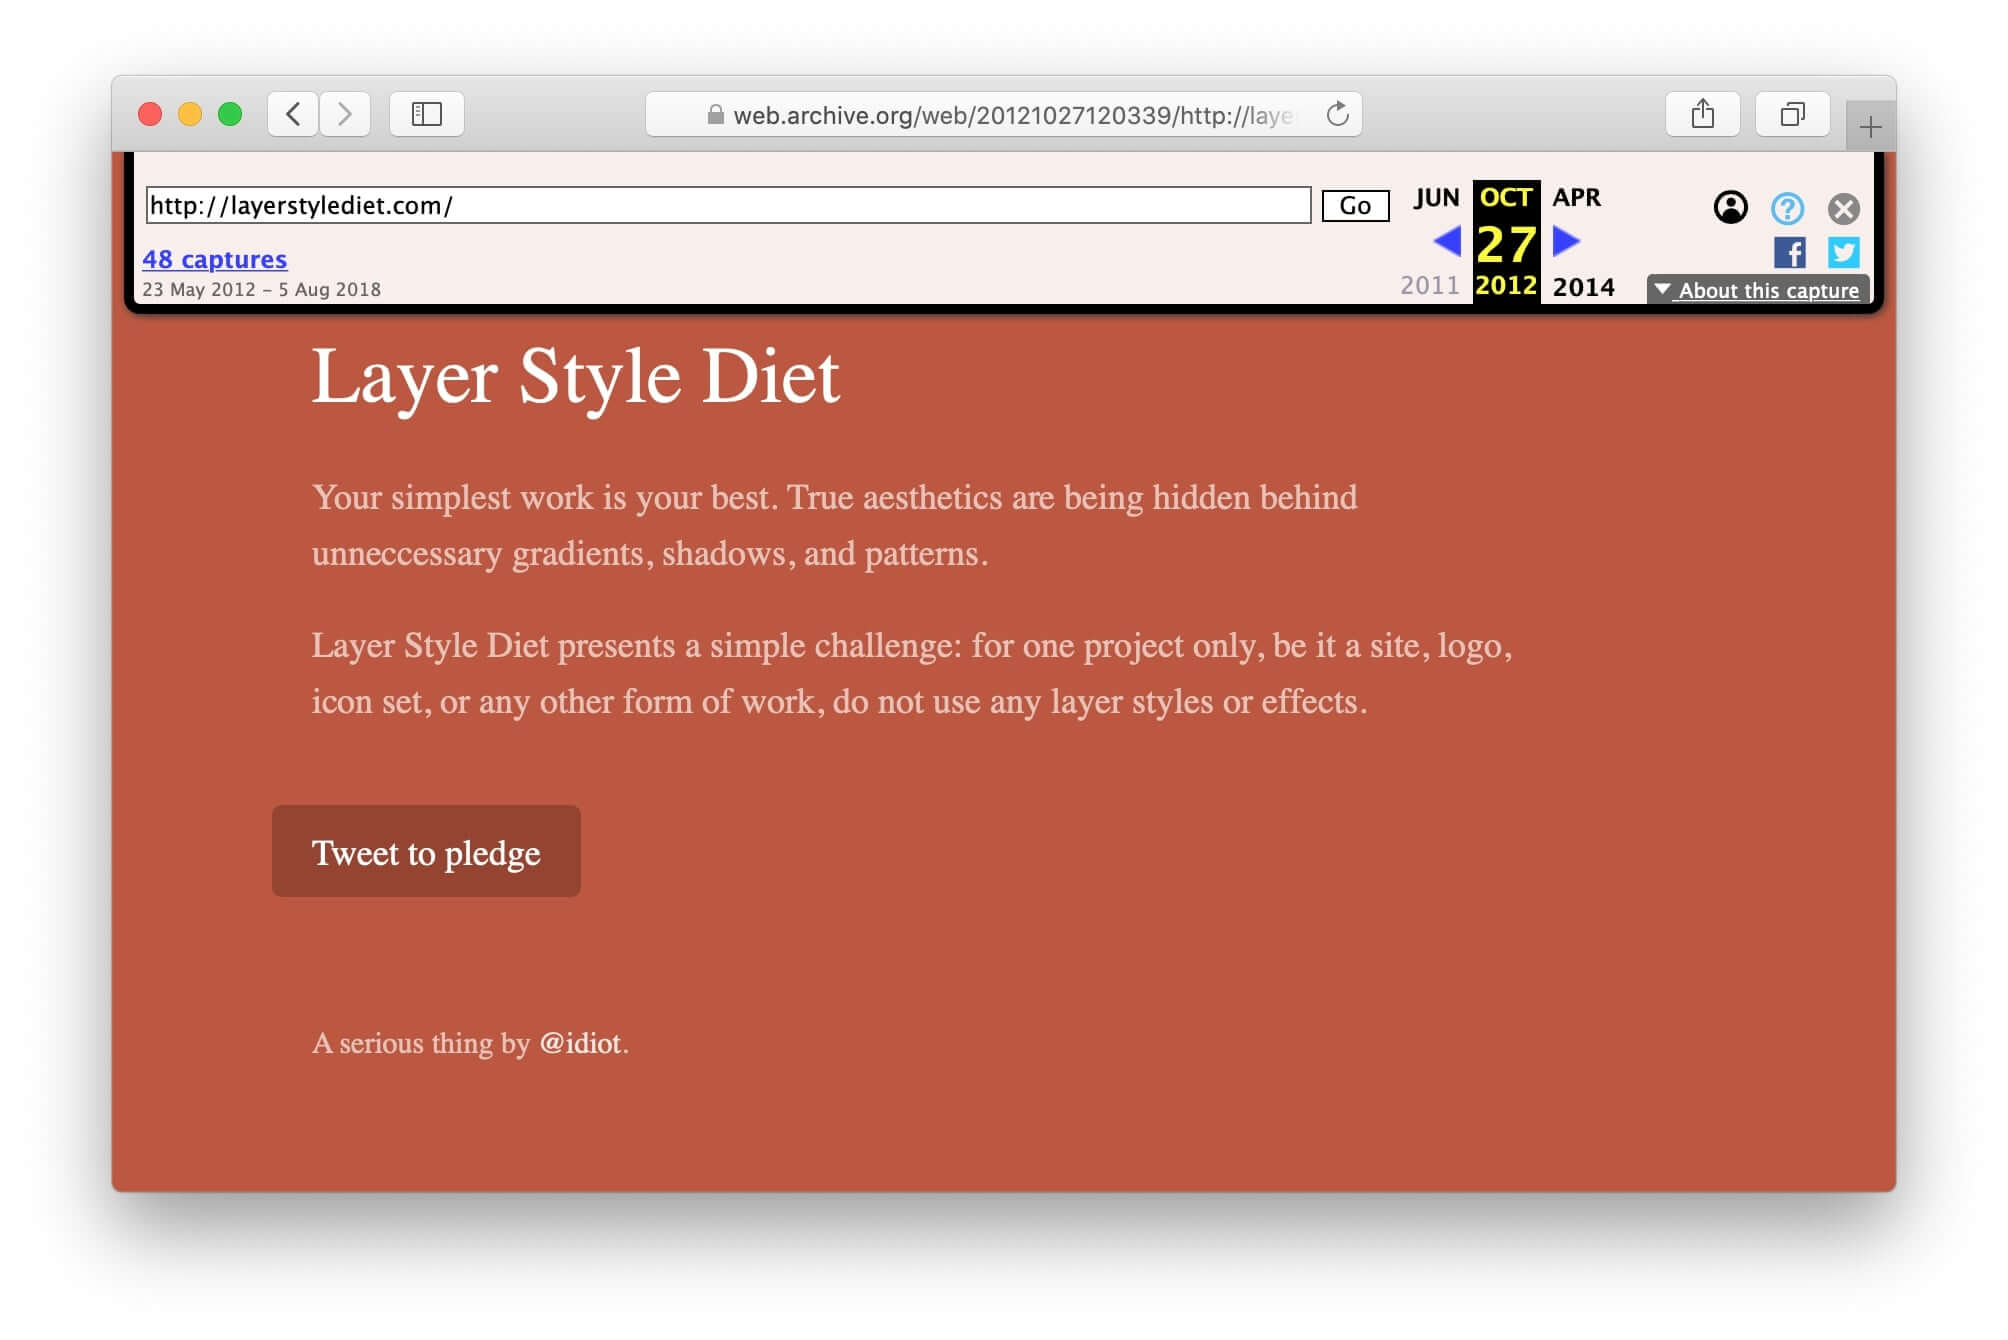 Screenshot of the layer style diet webpage